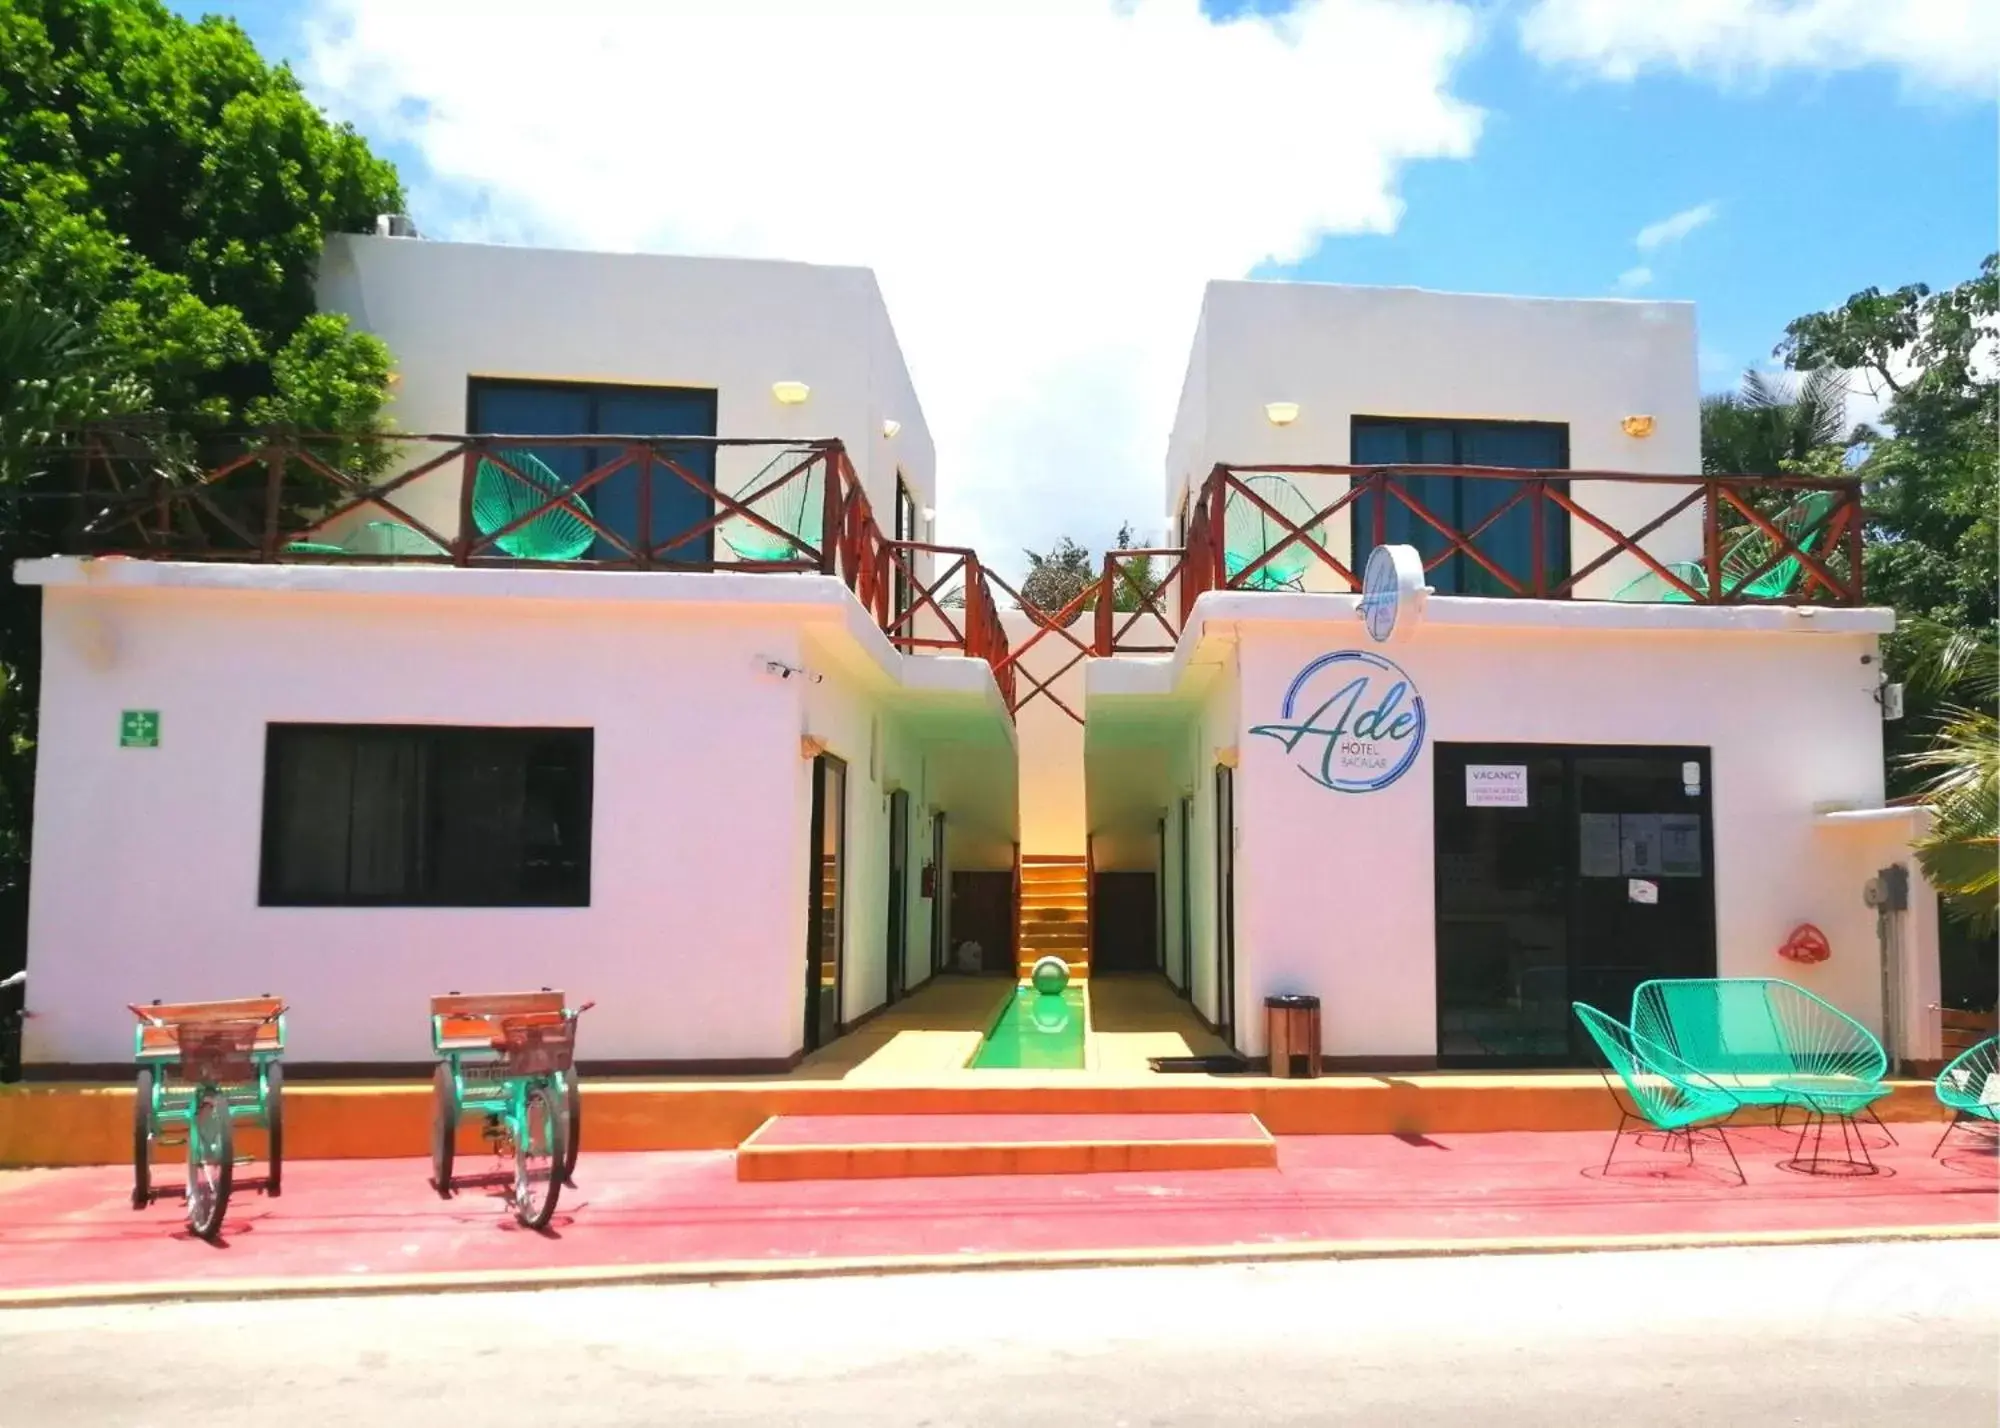 Property building, Swimming Pool in Ade Hotel Bacalar